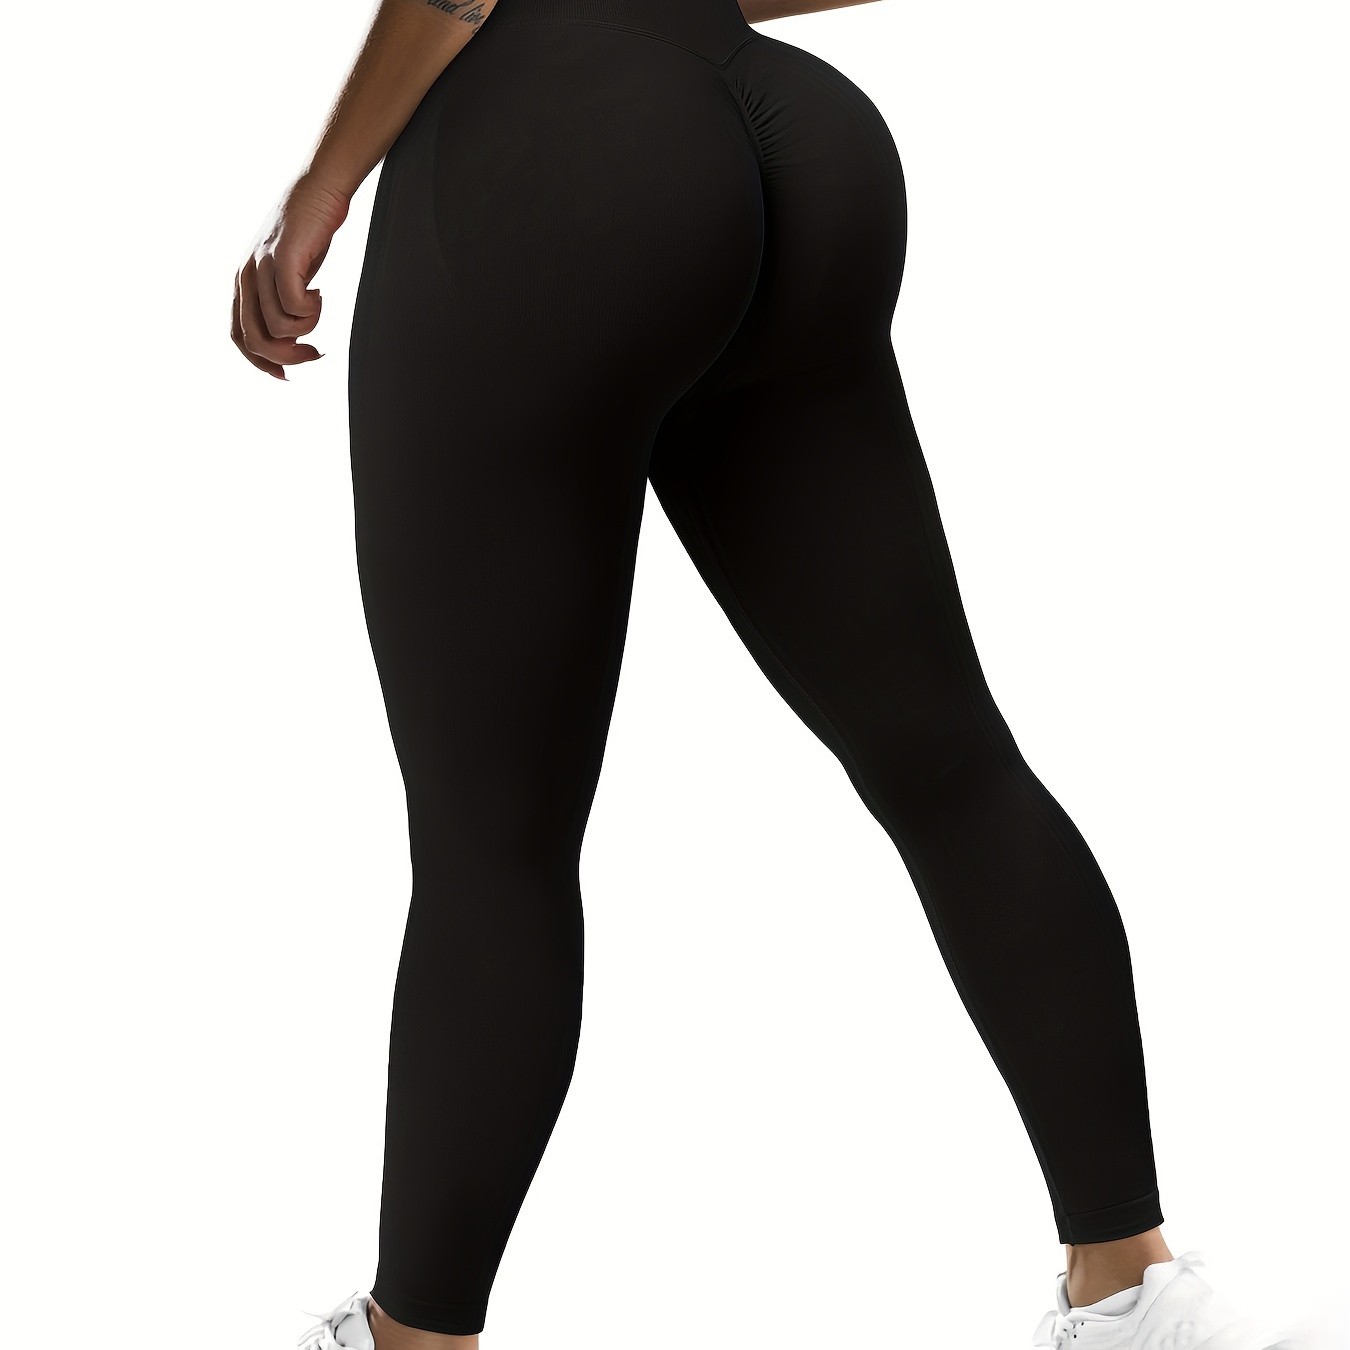 

Women's High Waist Yoga Pants, Solid Color Basic Leggings, Stretchy Comfortable Fitness Training Sports Tights, Athletic Activewear For Women